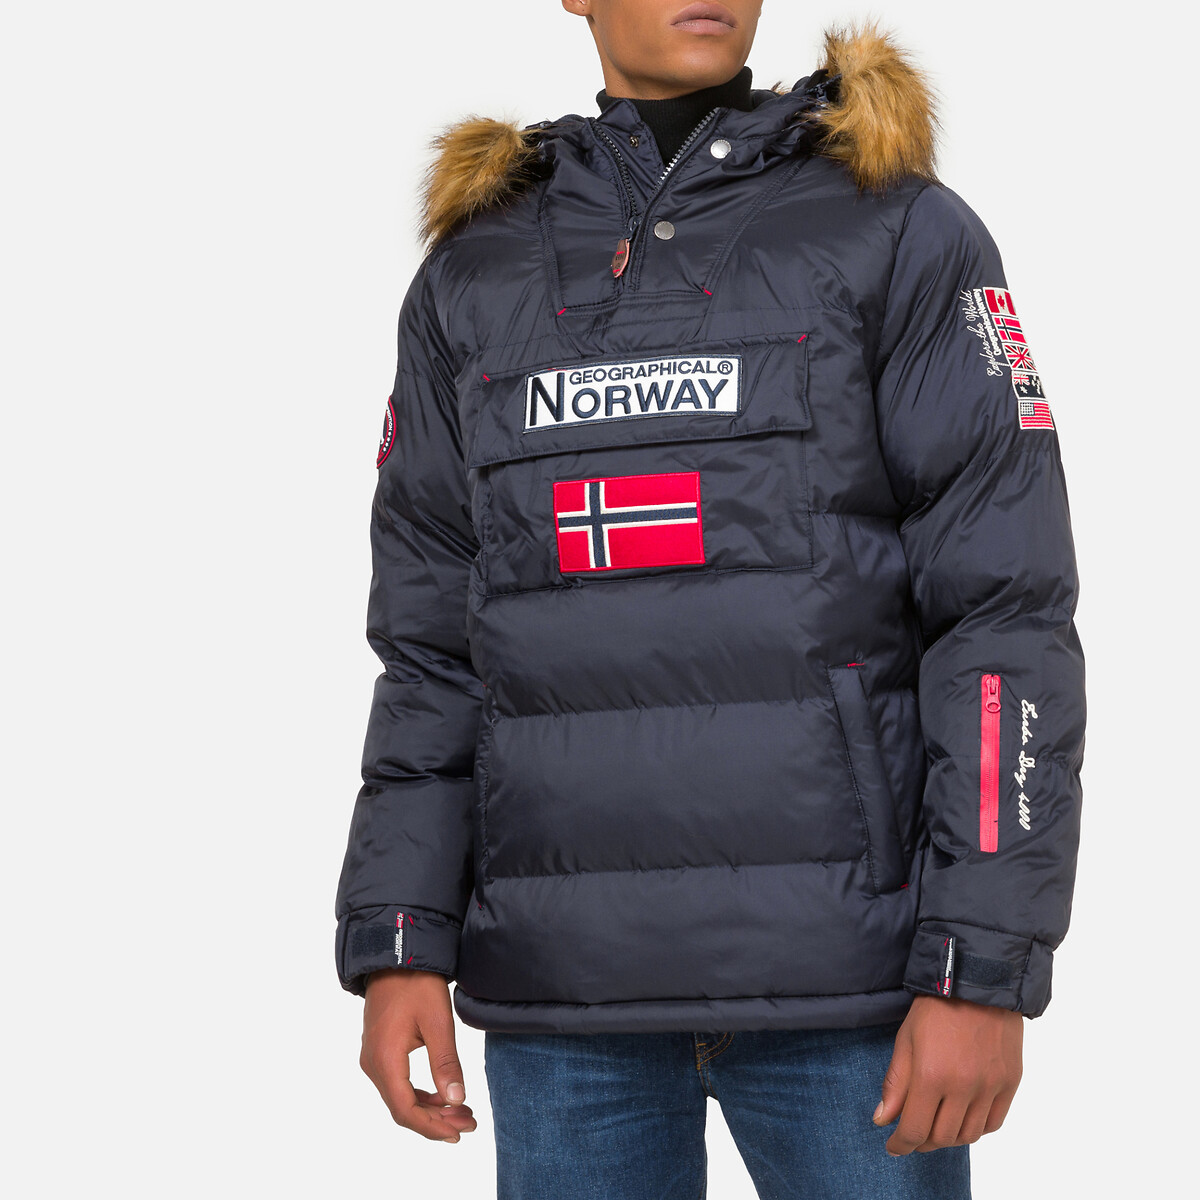 Geographical Norway Doudoune Bomber Homme 